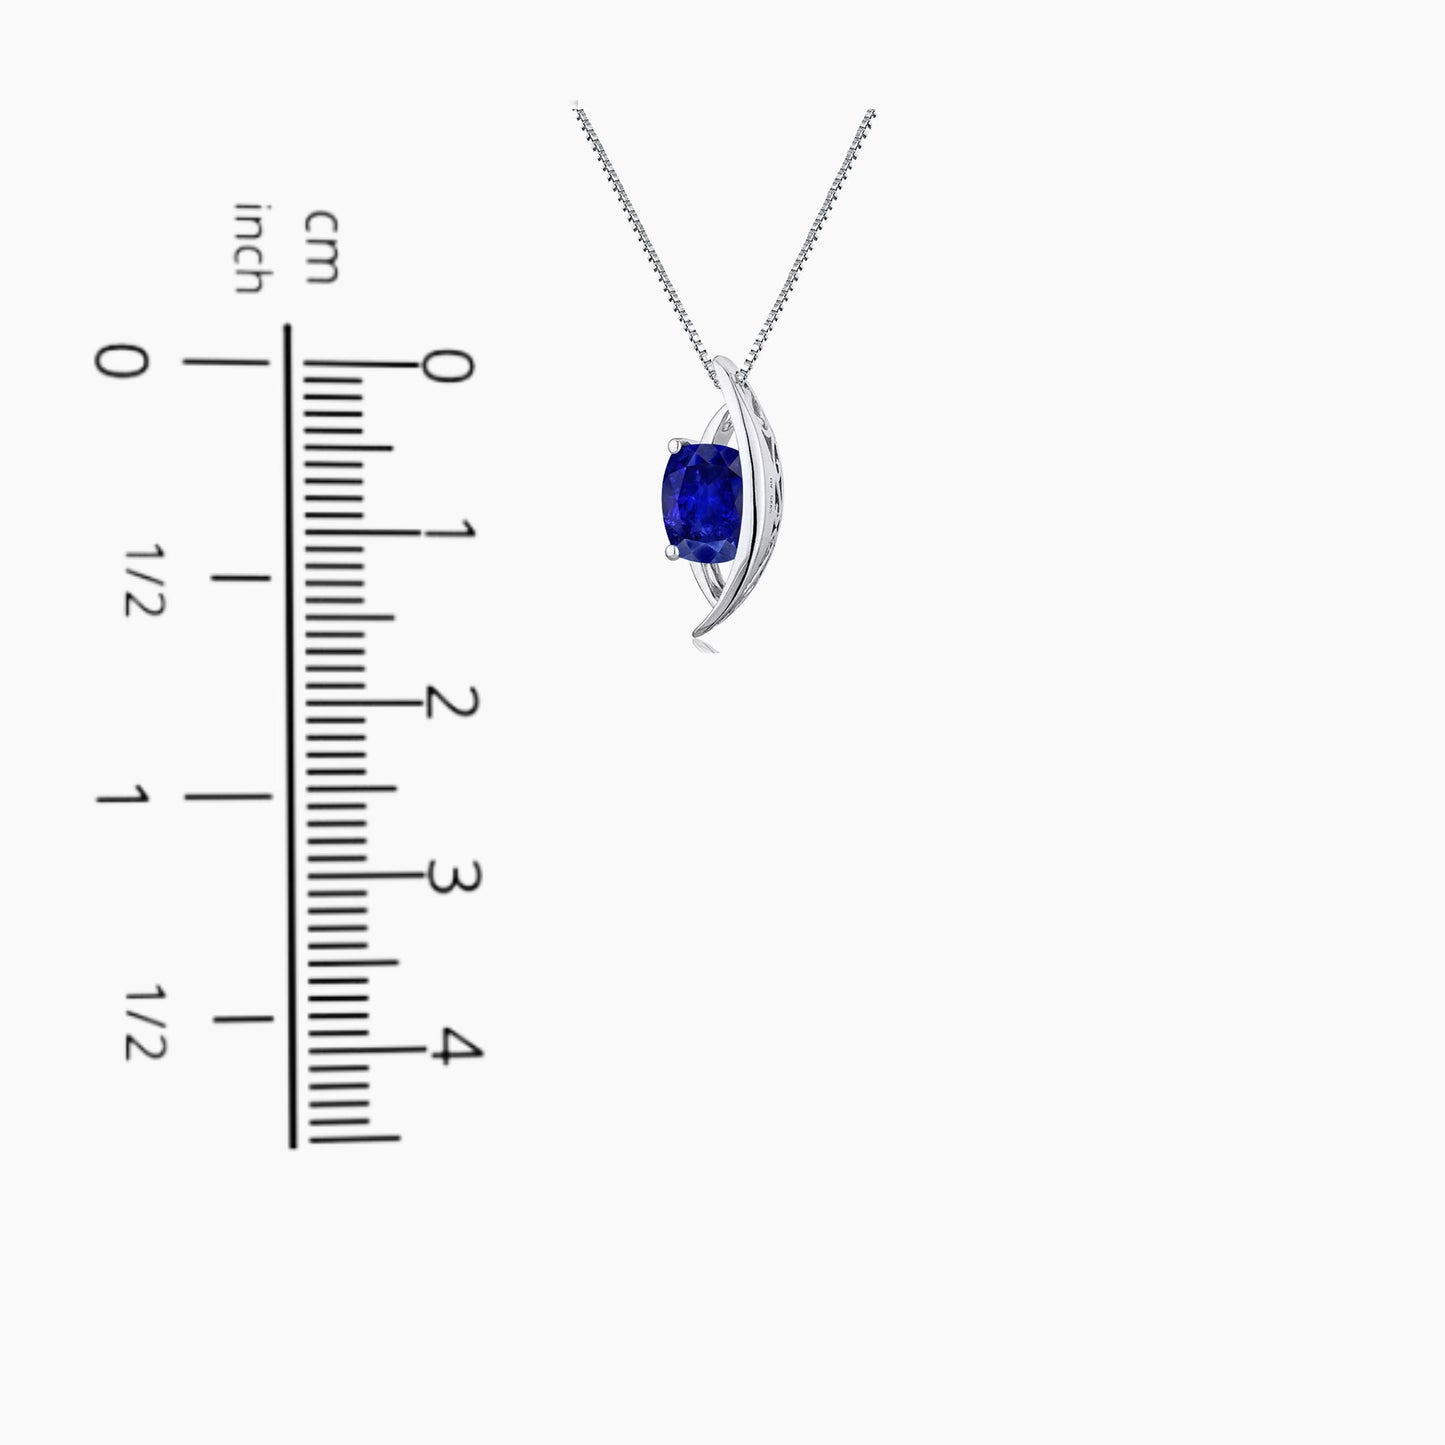 Sapphire Cushion Cut Globe Necklace in Sterling Silver